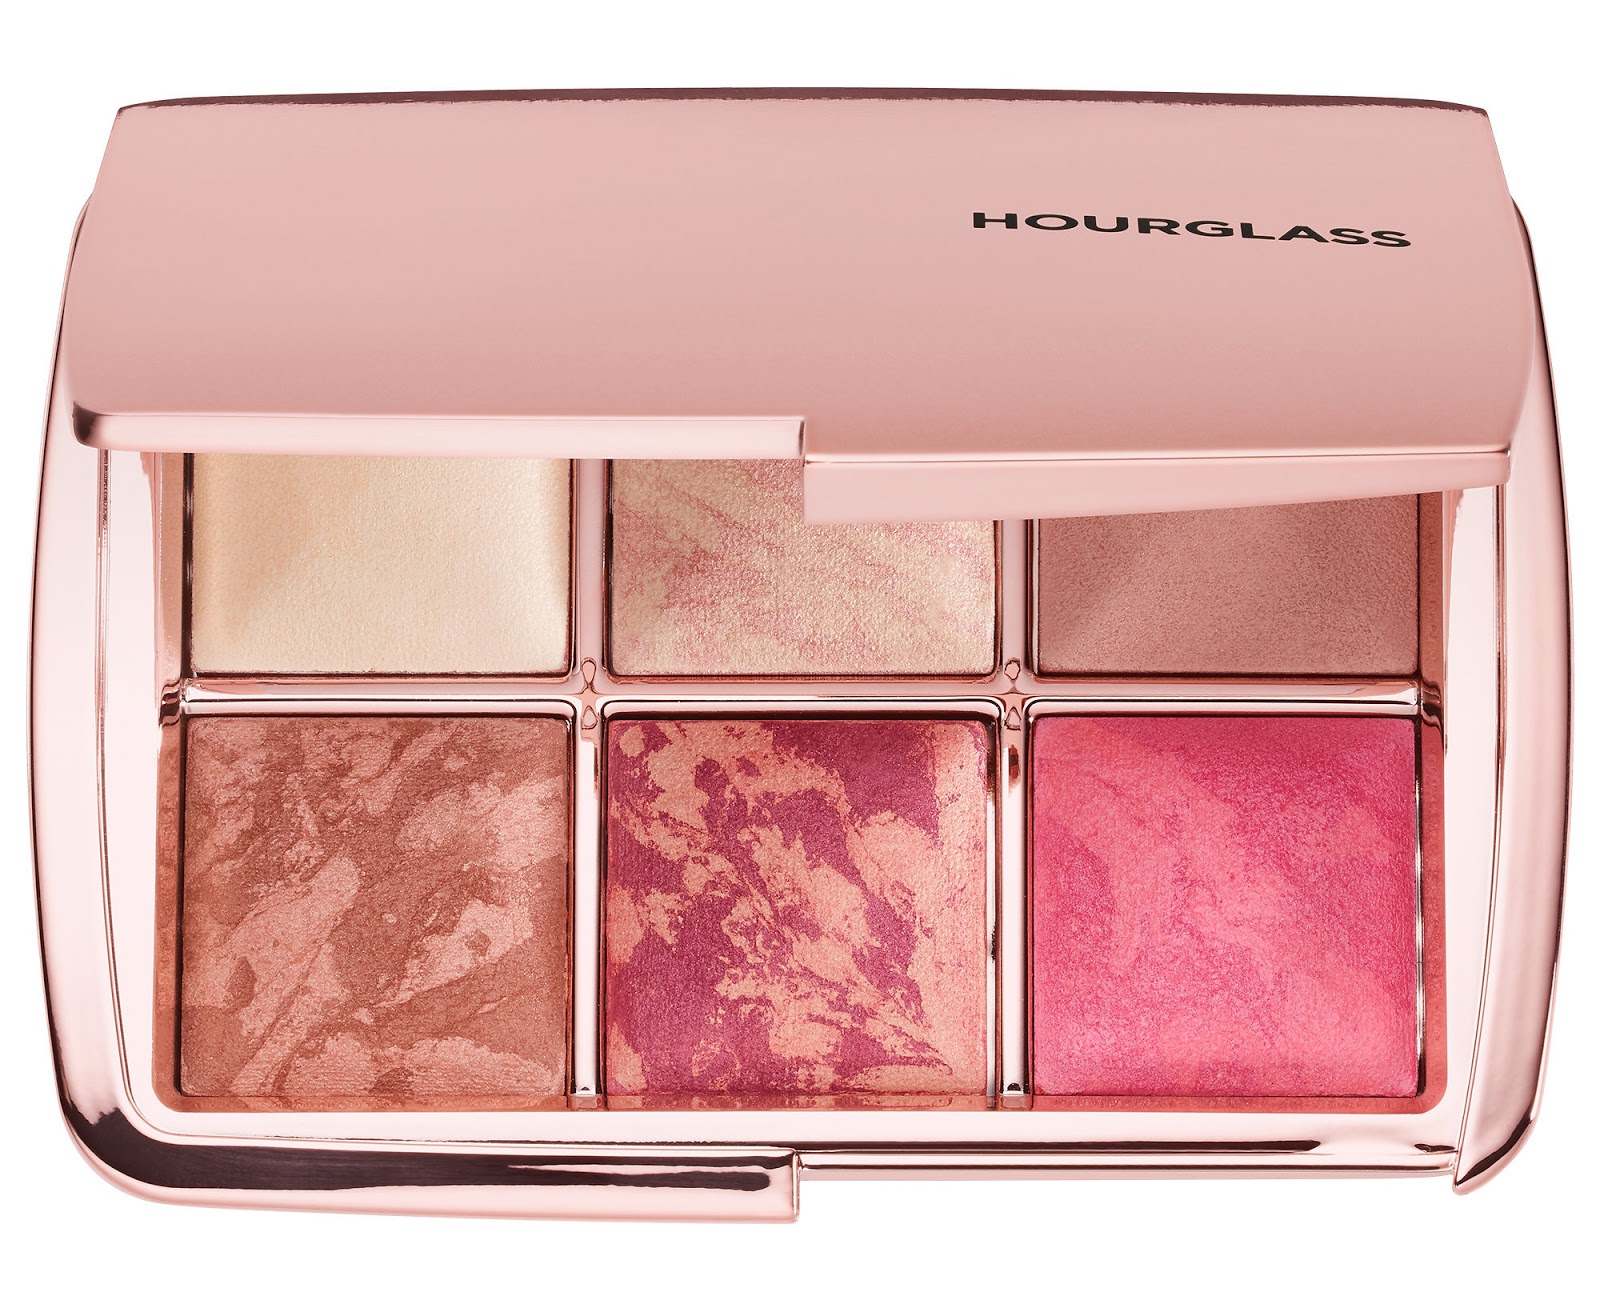 Upcoming | HOURGLASS Ambient Lighting Edit Volume 3, Ambient Metallic Strobe Palette, Value Sets (Holiday 2017) | Modernaires: Upcoming | HOURGLASS Ambient Lighting Edit Volume 3, Ambient Metallic Strobe Lighting Palette, Value Sets (Holiday